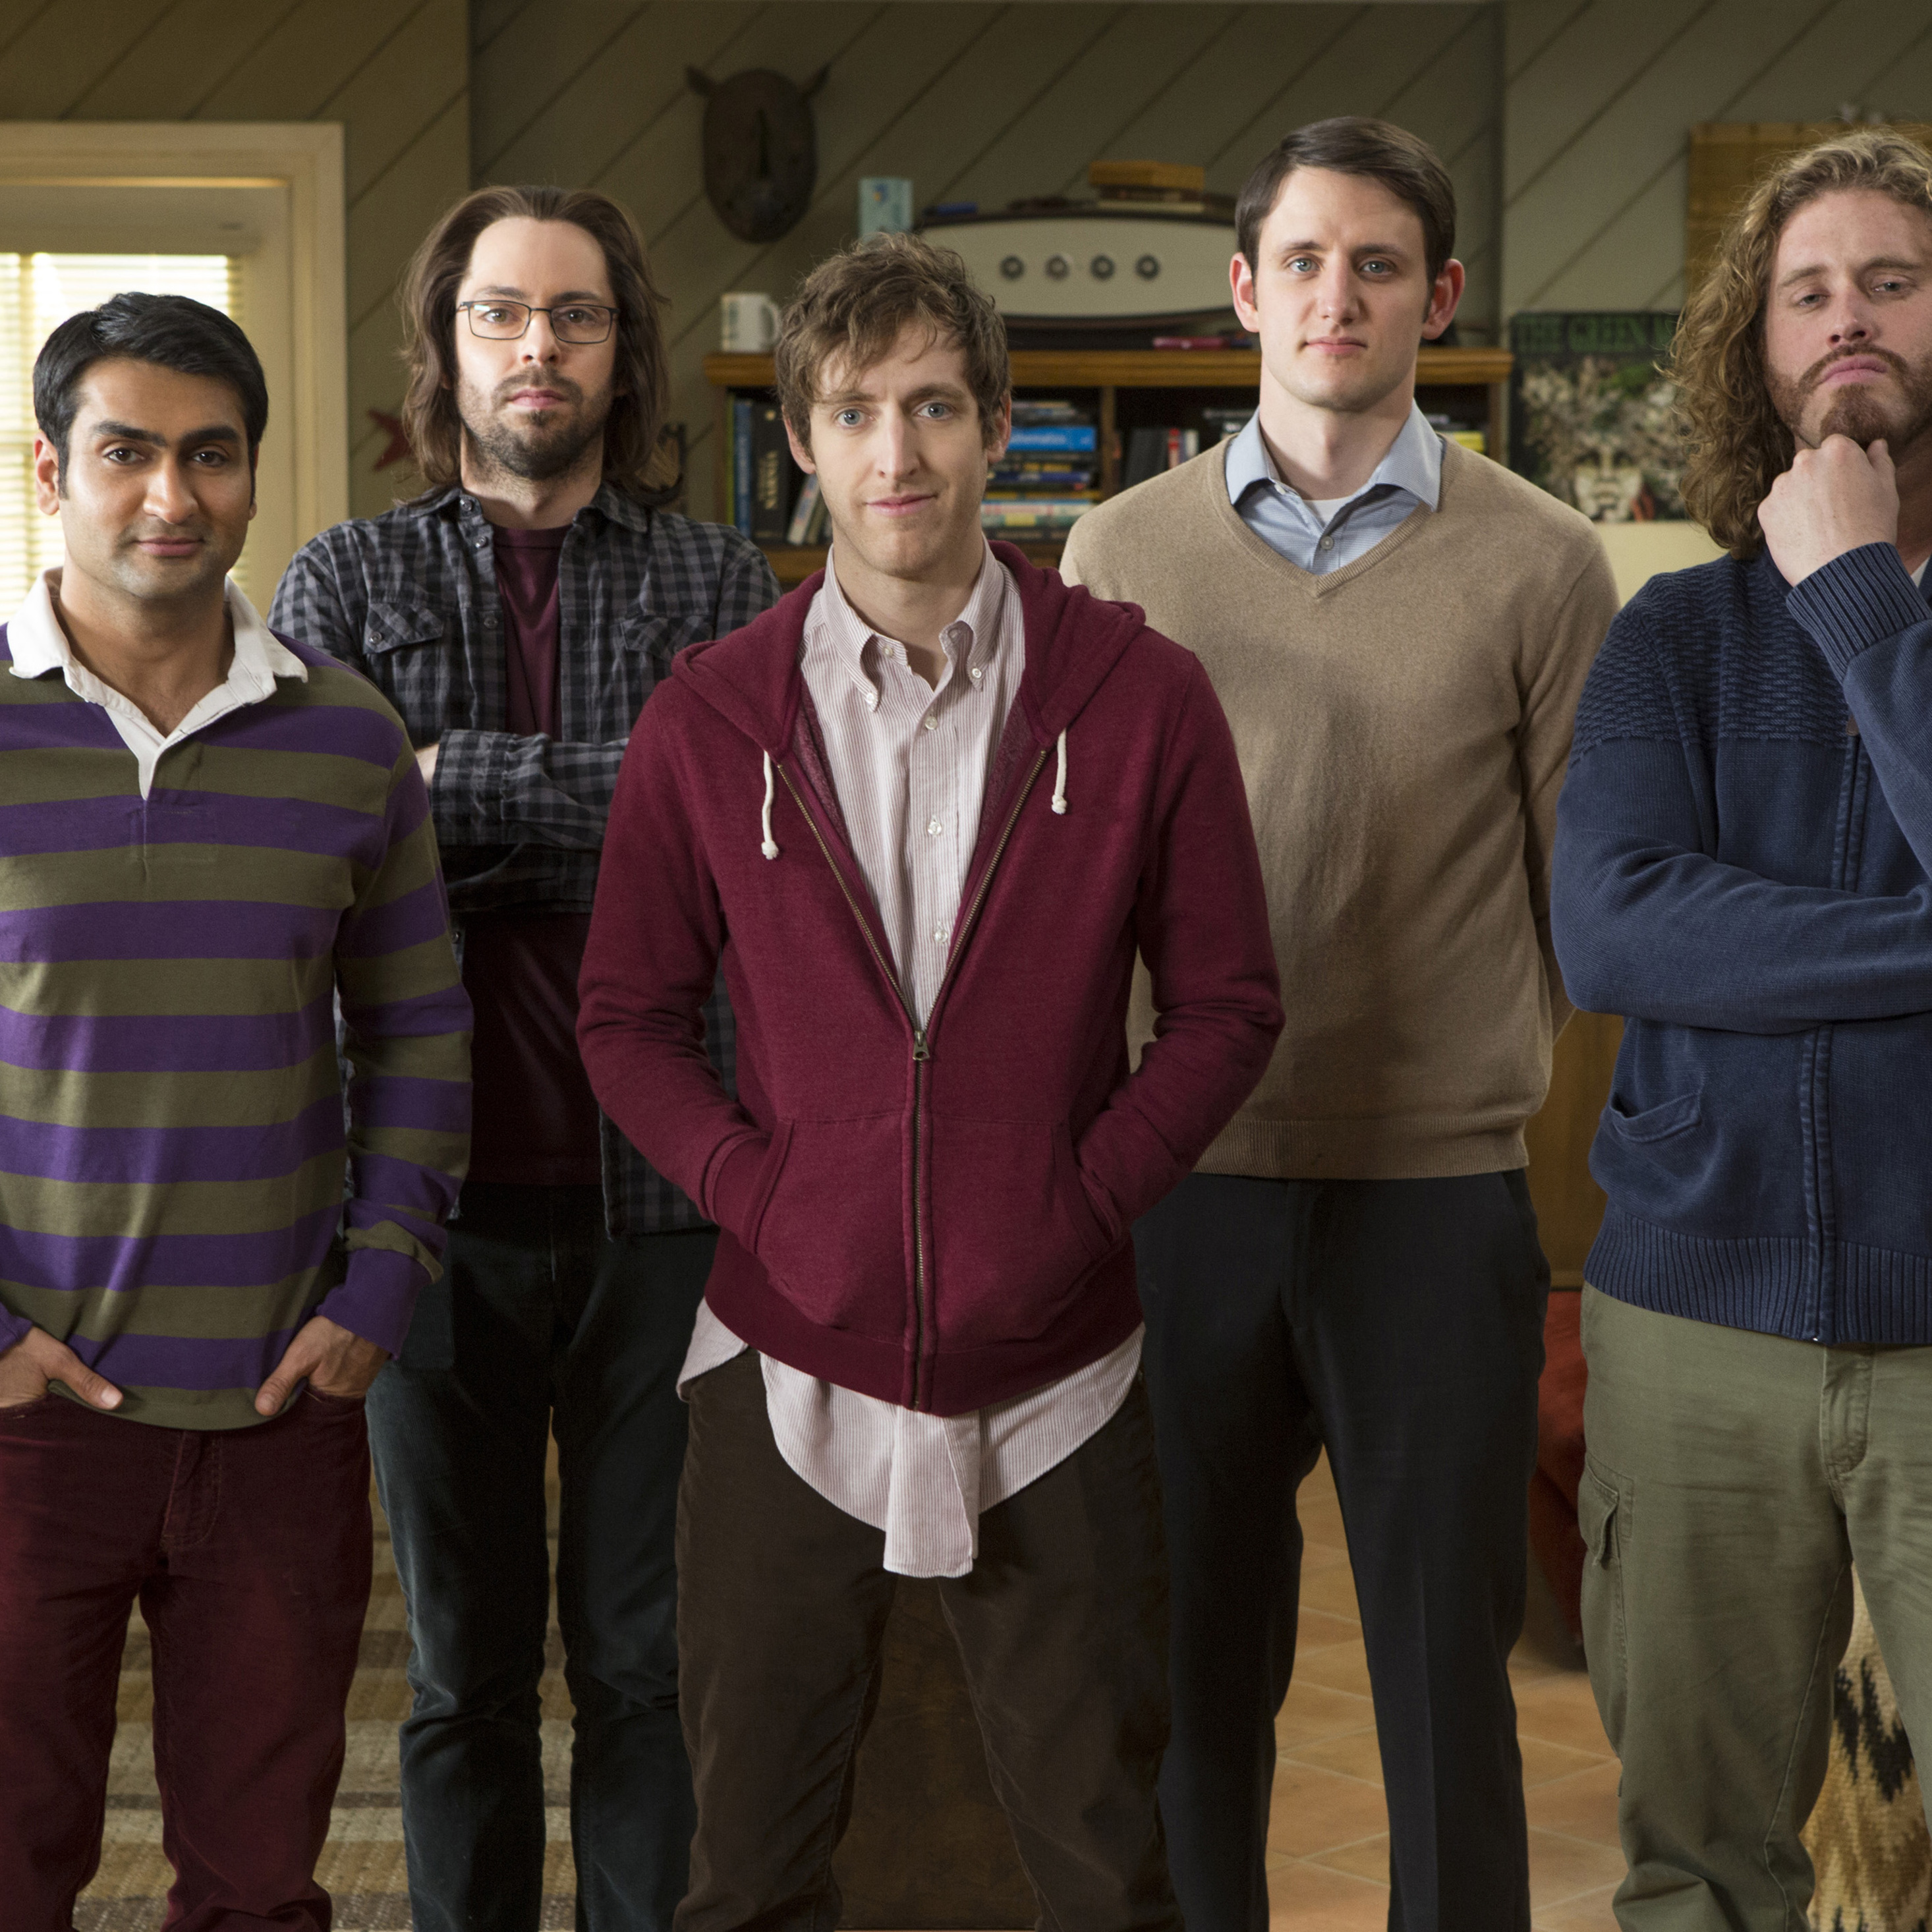 Silicon Valley Cast 4k In 2932x2932 Resolution. silicon-valley-cast-4k-zi.j...